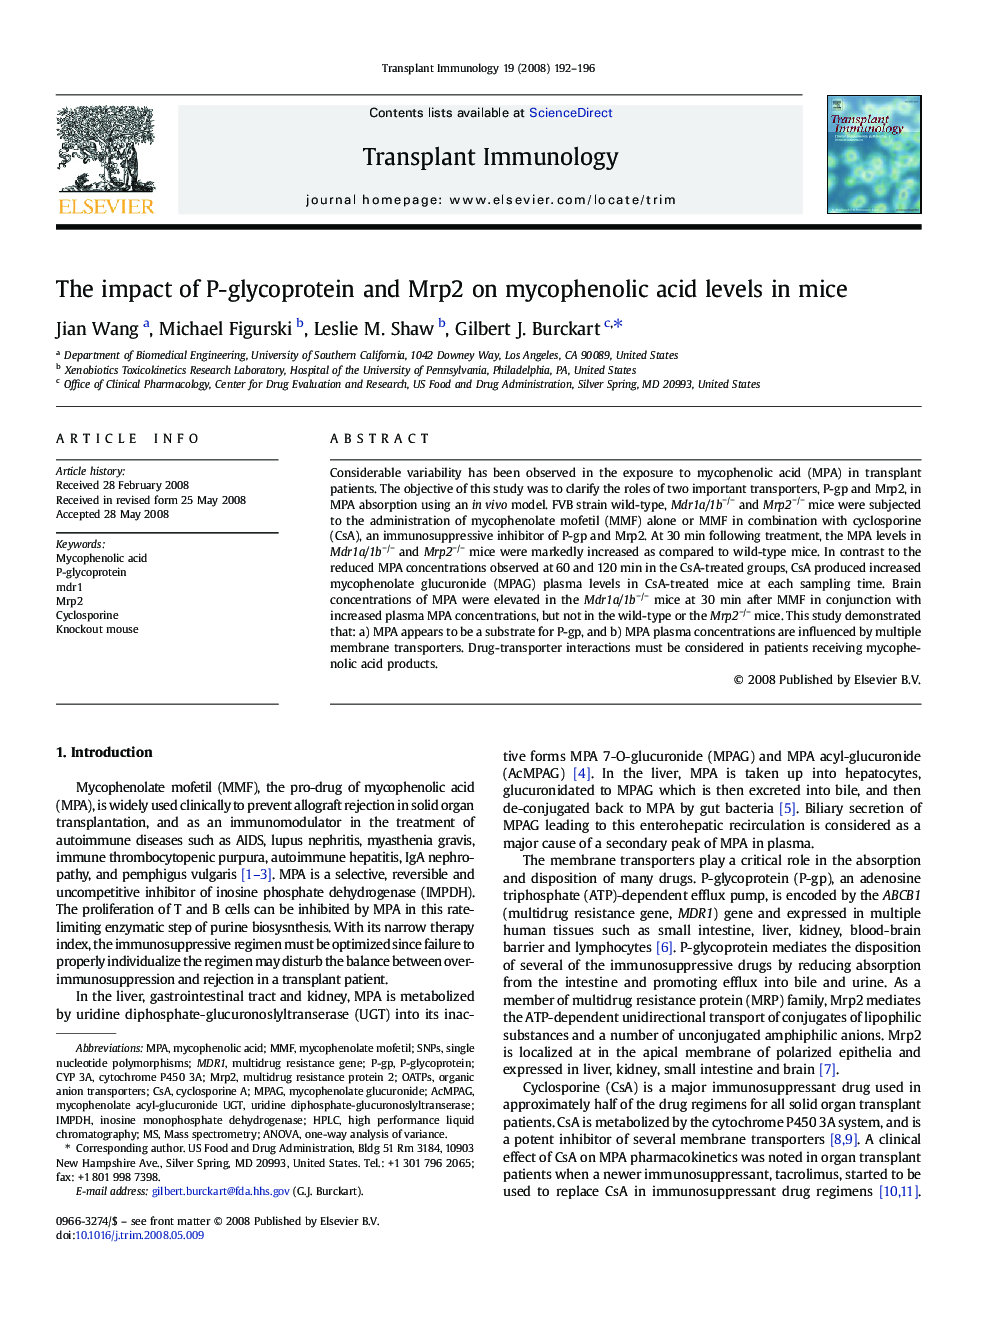 The impact of P-glycoprotein and Mrp2 on mycophenolic acid levels in mice